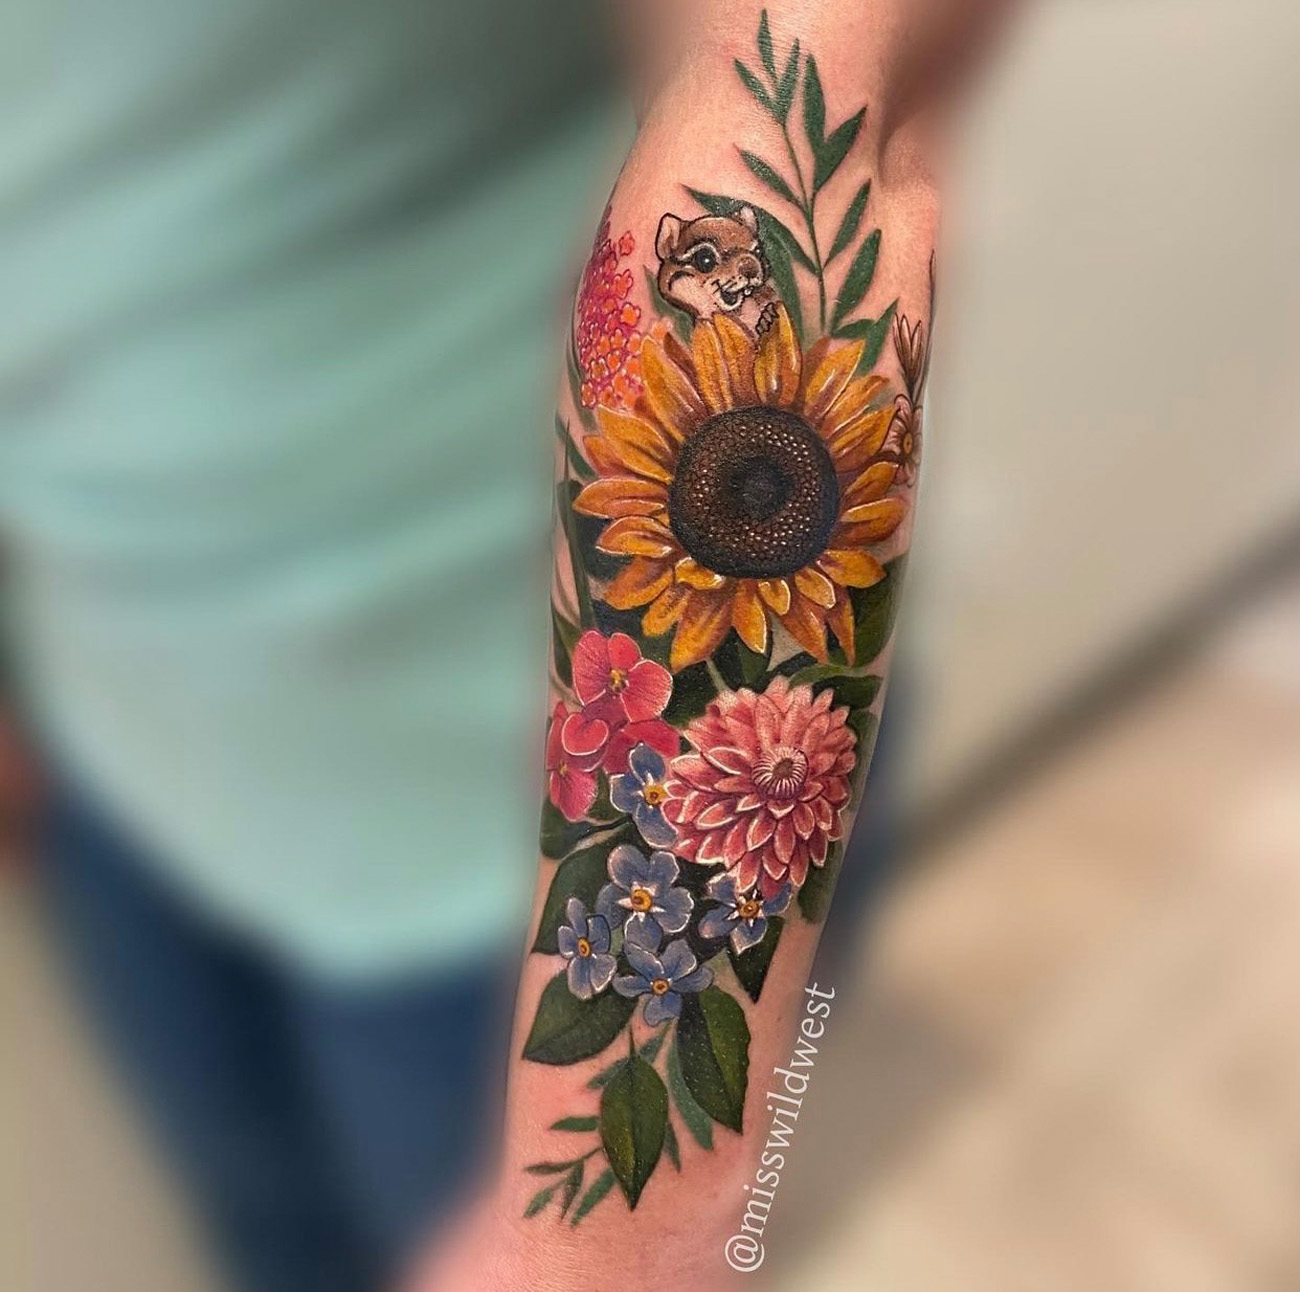 Realism Color Tattoos in Central Oregon including animal tattoos, flower  tattoos, realism tattoos, black and grey or color tattoos, pet portrait  tattoos, Bend oregon tattoos, oregon tattoos.